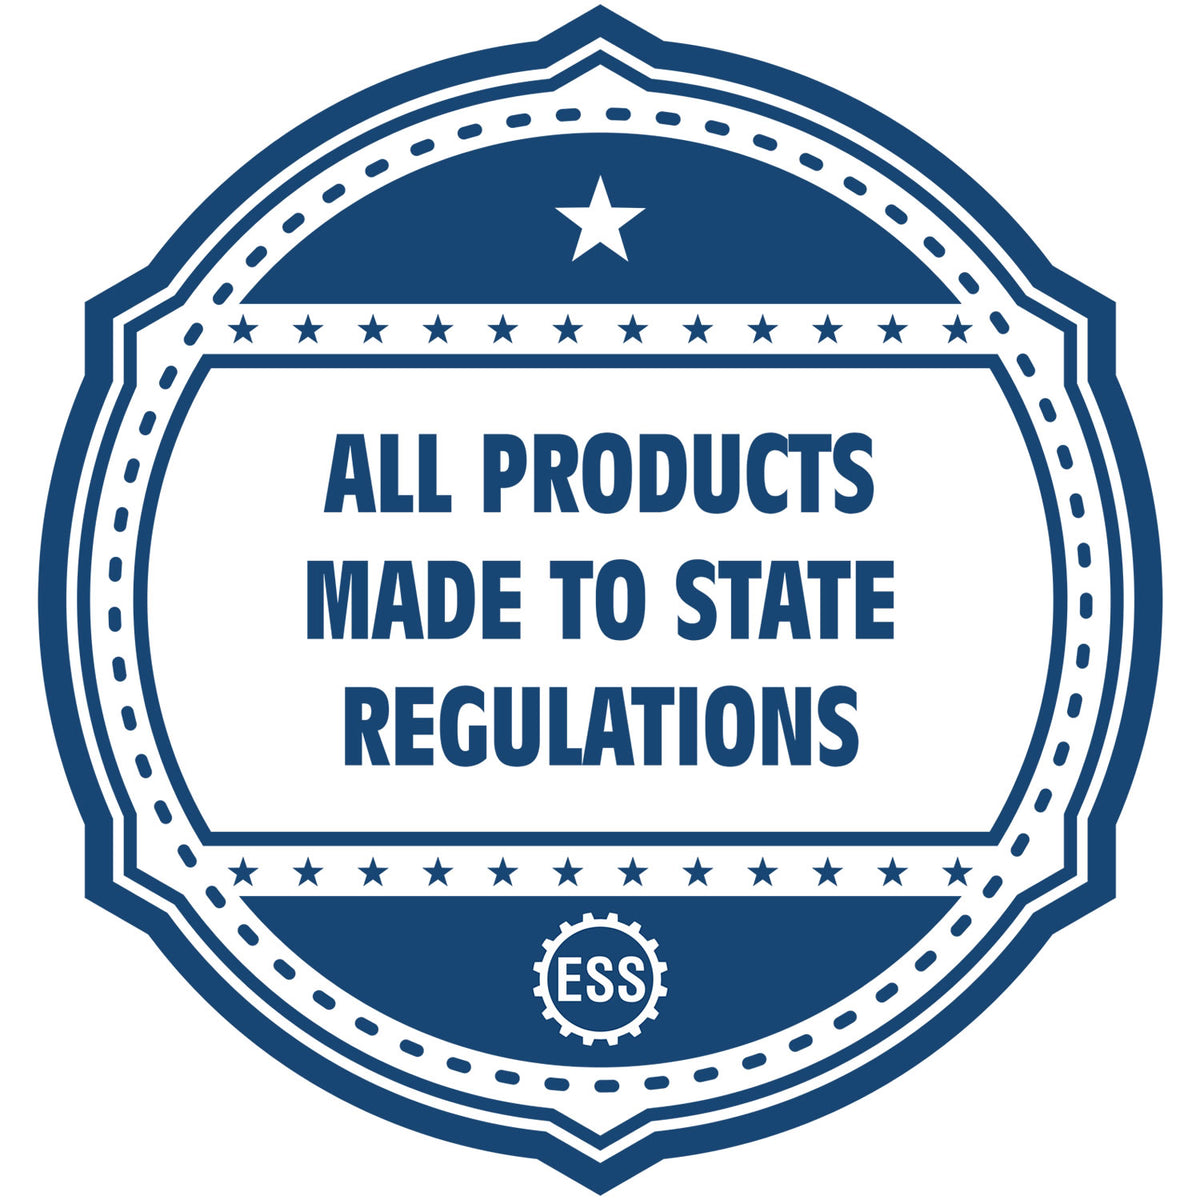 A blue icon or badge for the Hybrid Alabama Engineer Seal showing that this product is made in compliance with state regulations.